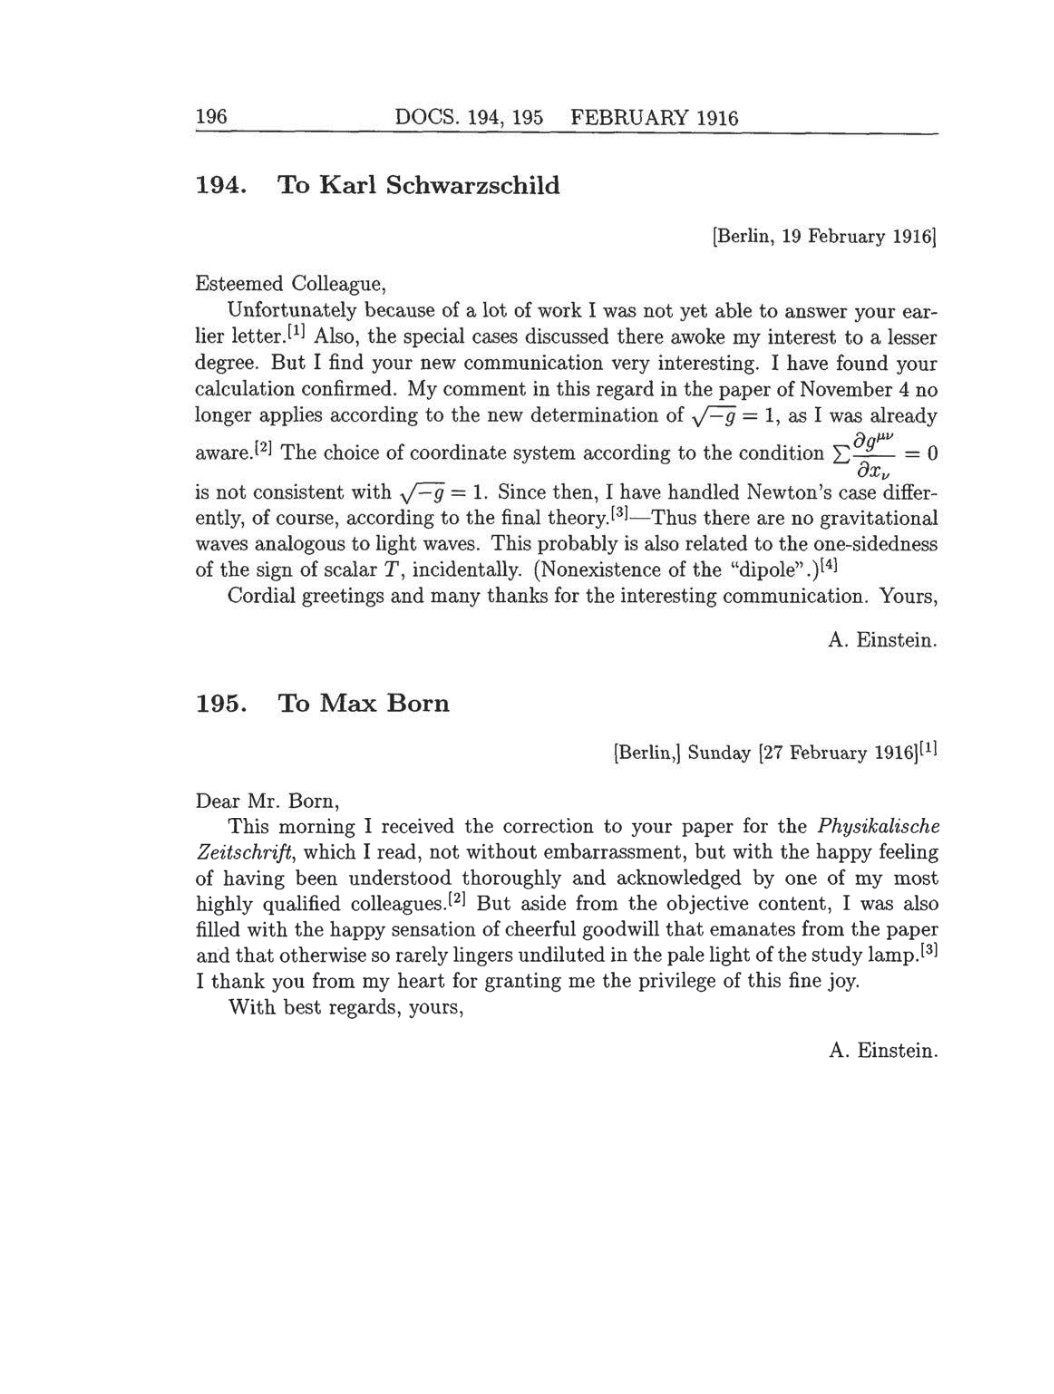 Volume 8: The Berlin Years: Correspondence, 1914-1918 (English translation supplement) page 196